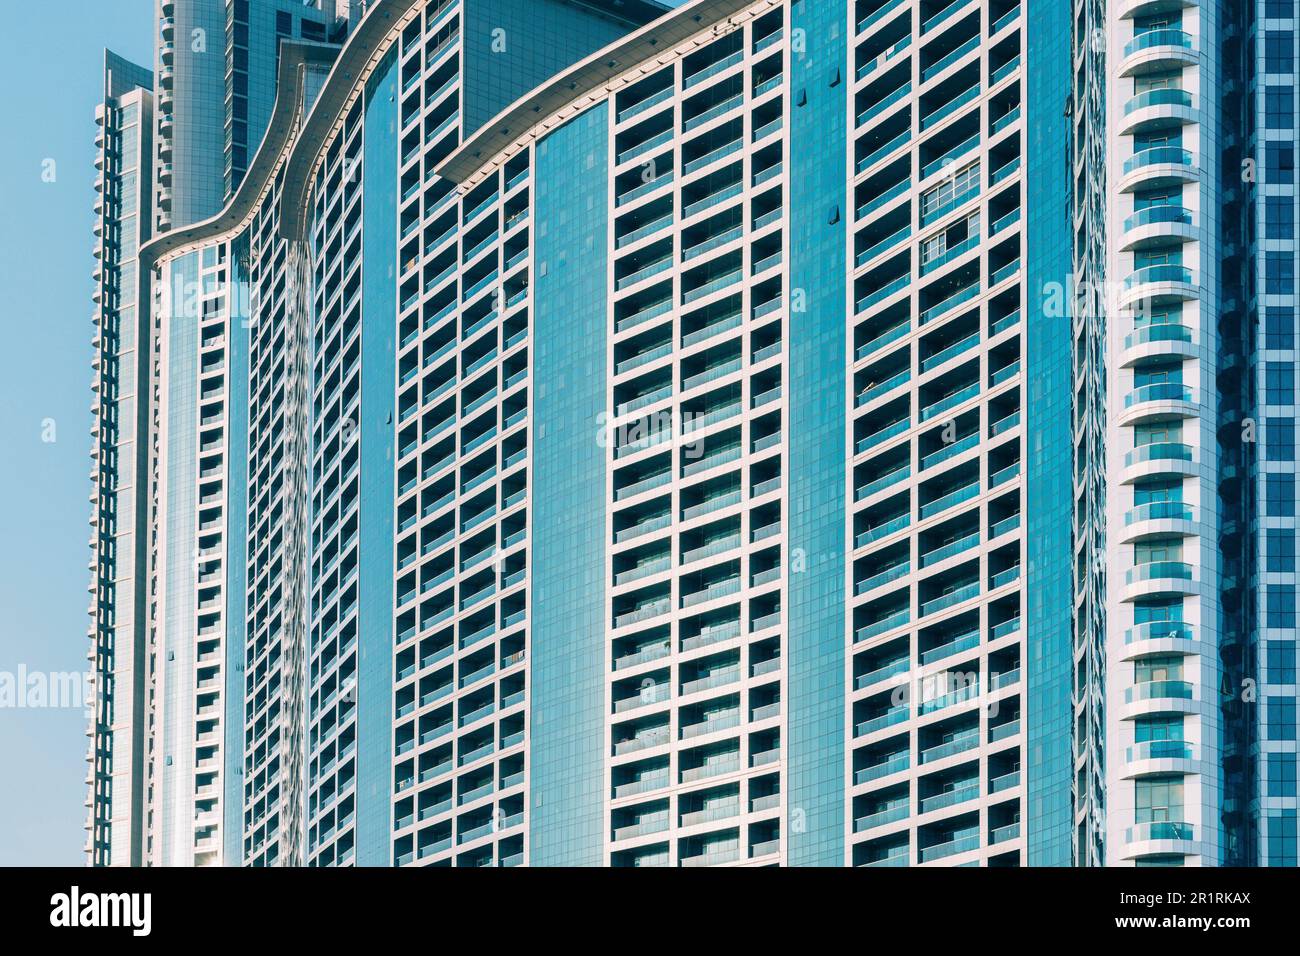 Wall With A Balcony Of New Empty Modern Multi-storey Residential Building House In Residential Area On Blue Sky. Close Up. Stock Photo